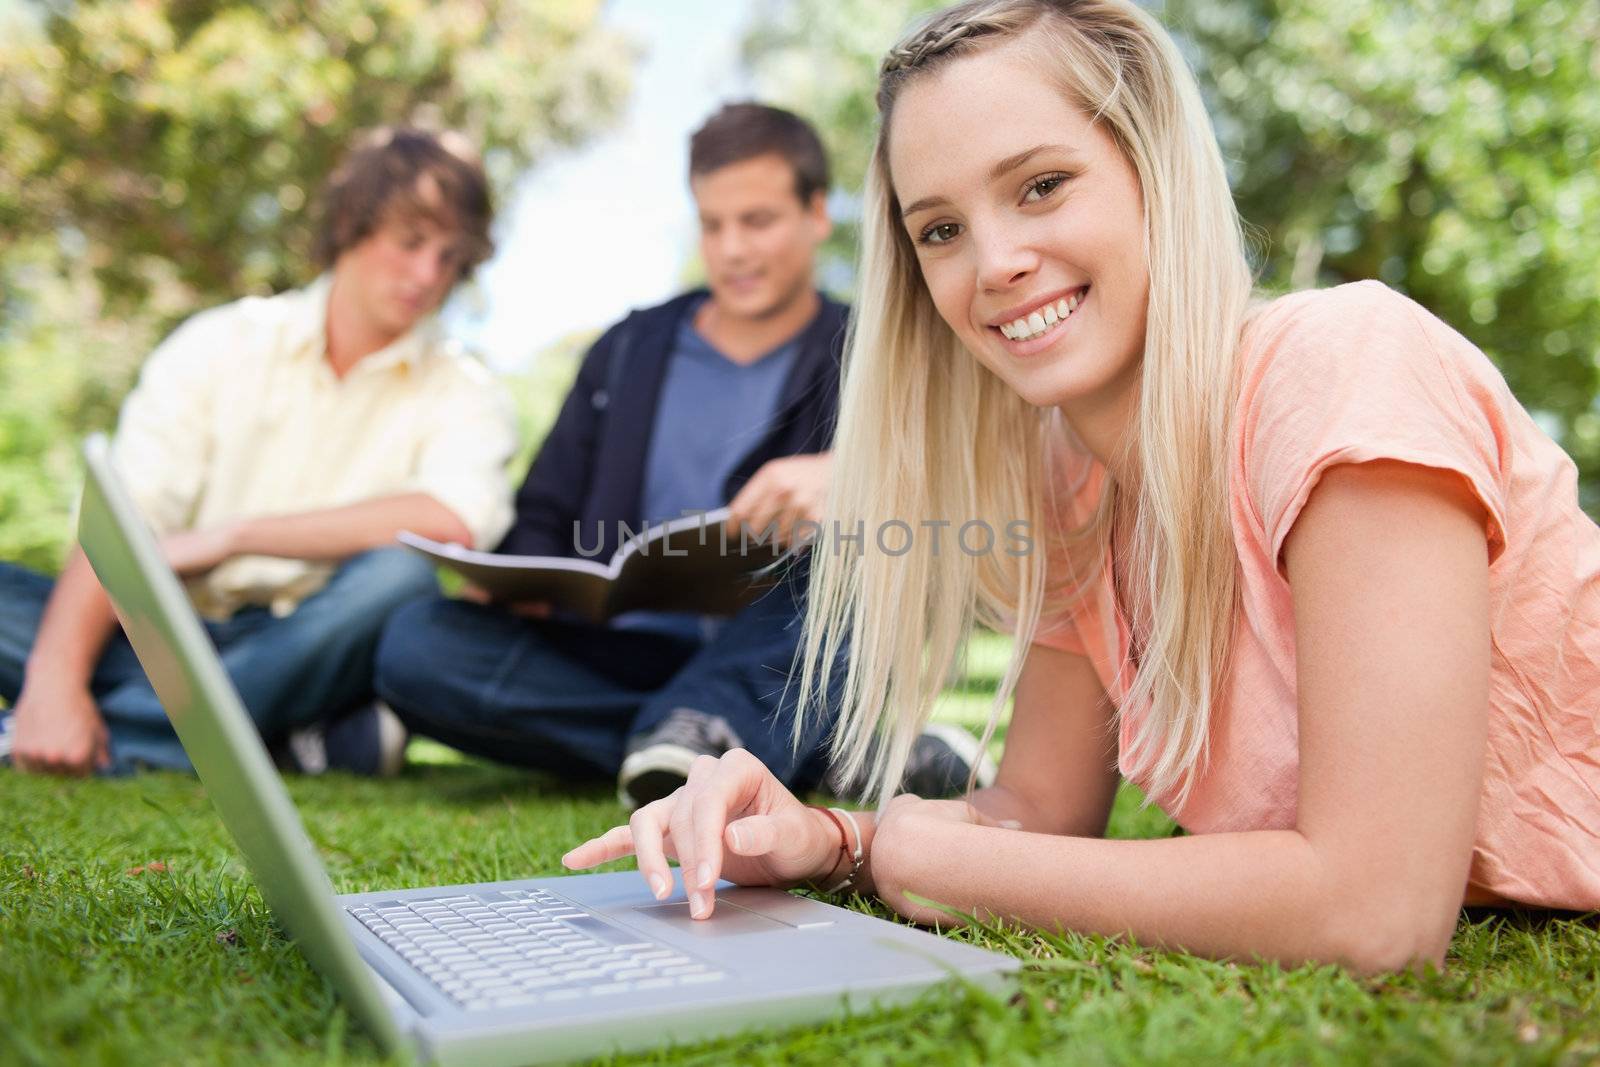 Portrait of a girl using a laptop while lying in a park with friends in background